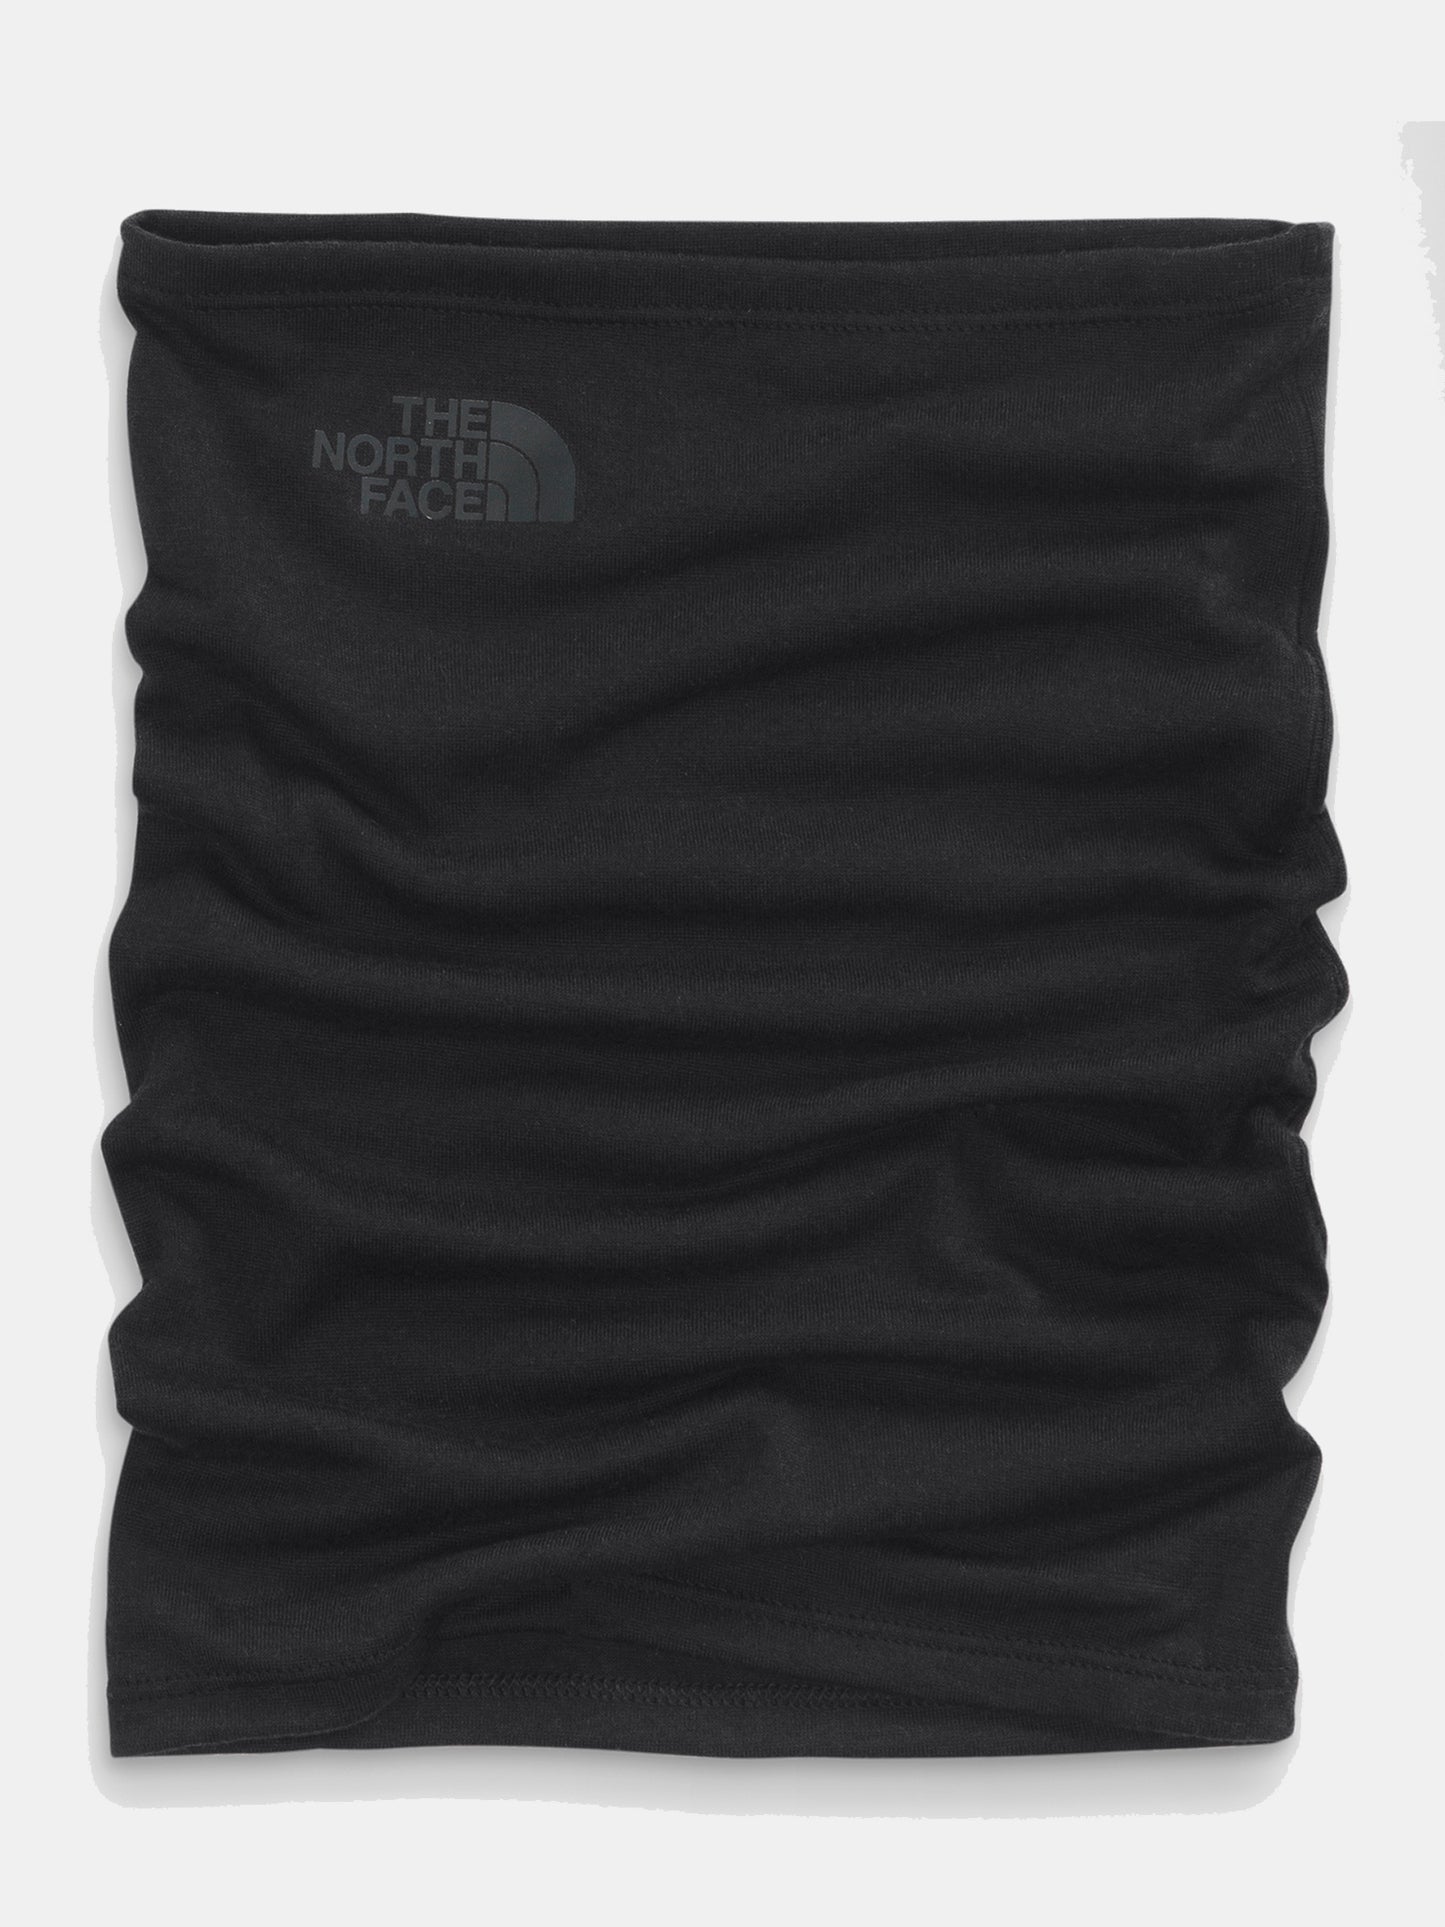 The North Face Wool Layered Neck Gaiter